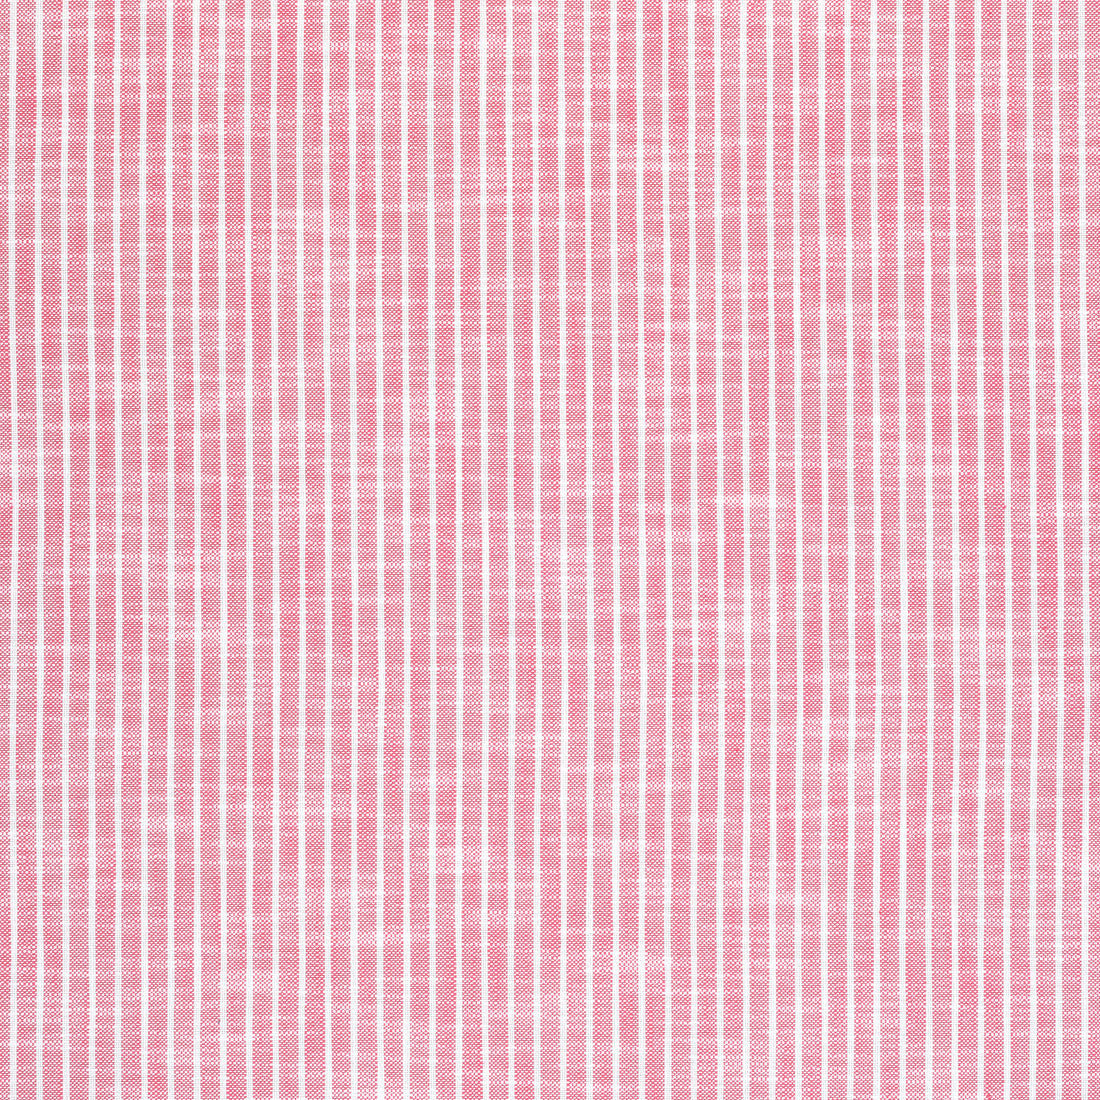 Bayside Stripe fabric in peony color - pattern number W73470 - by Thibaut in the Landmark collection